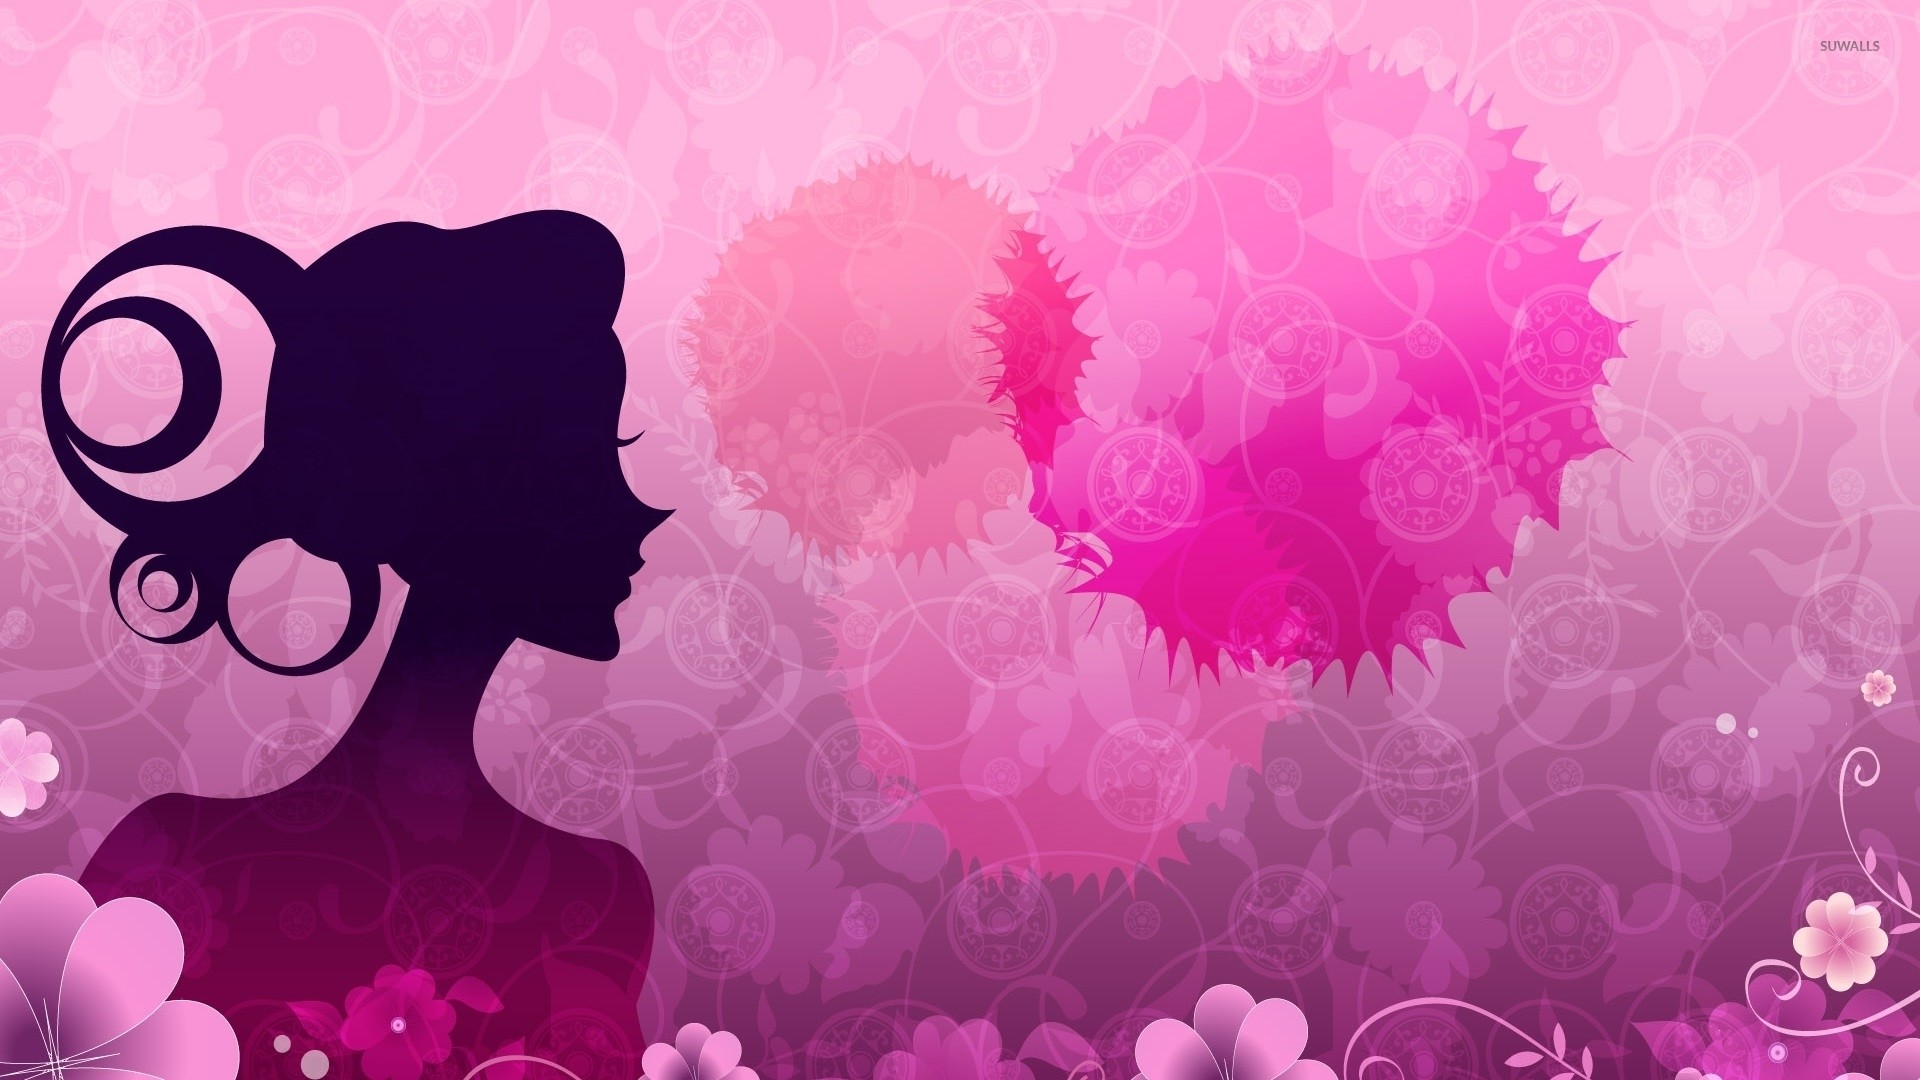 1920x1080 Woman silhouette by the pink flowers wallpaper